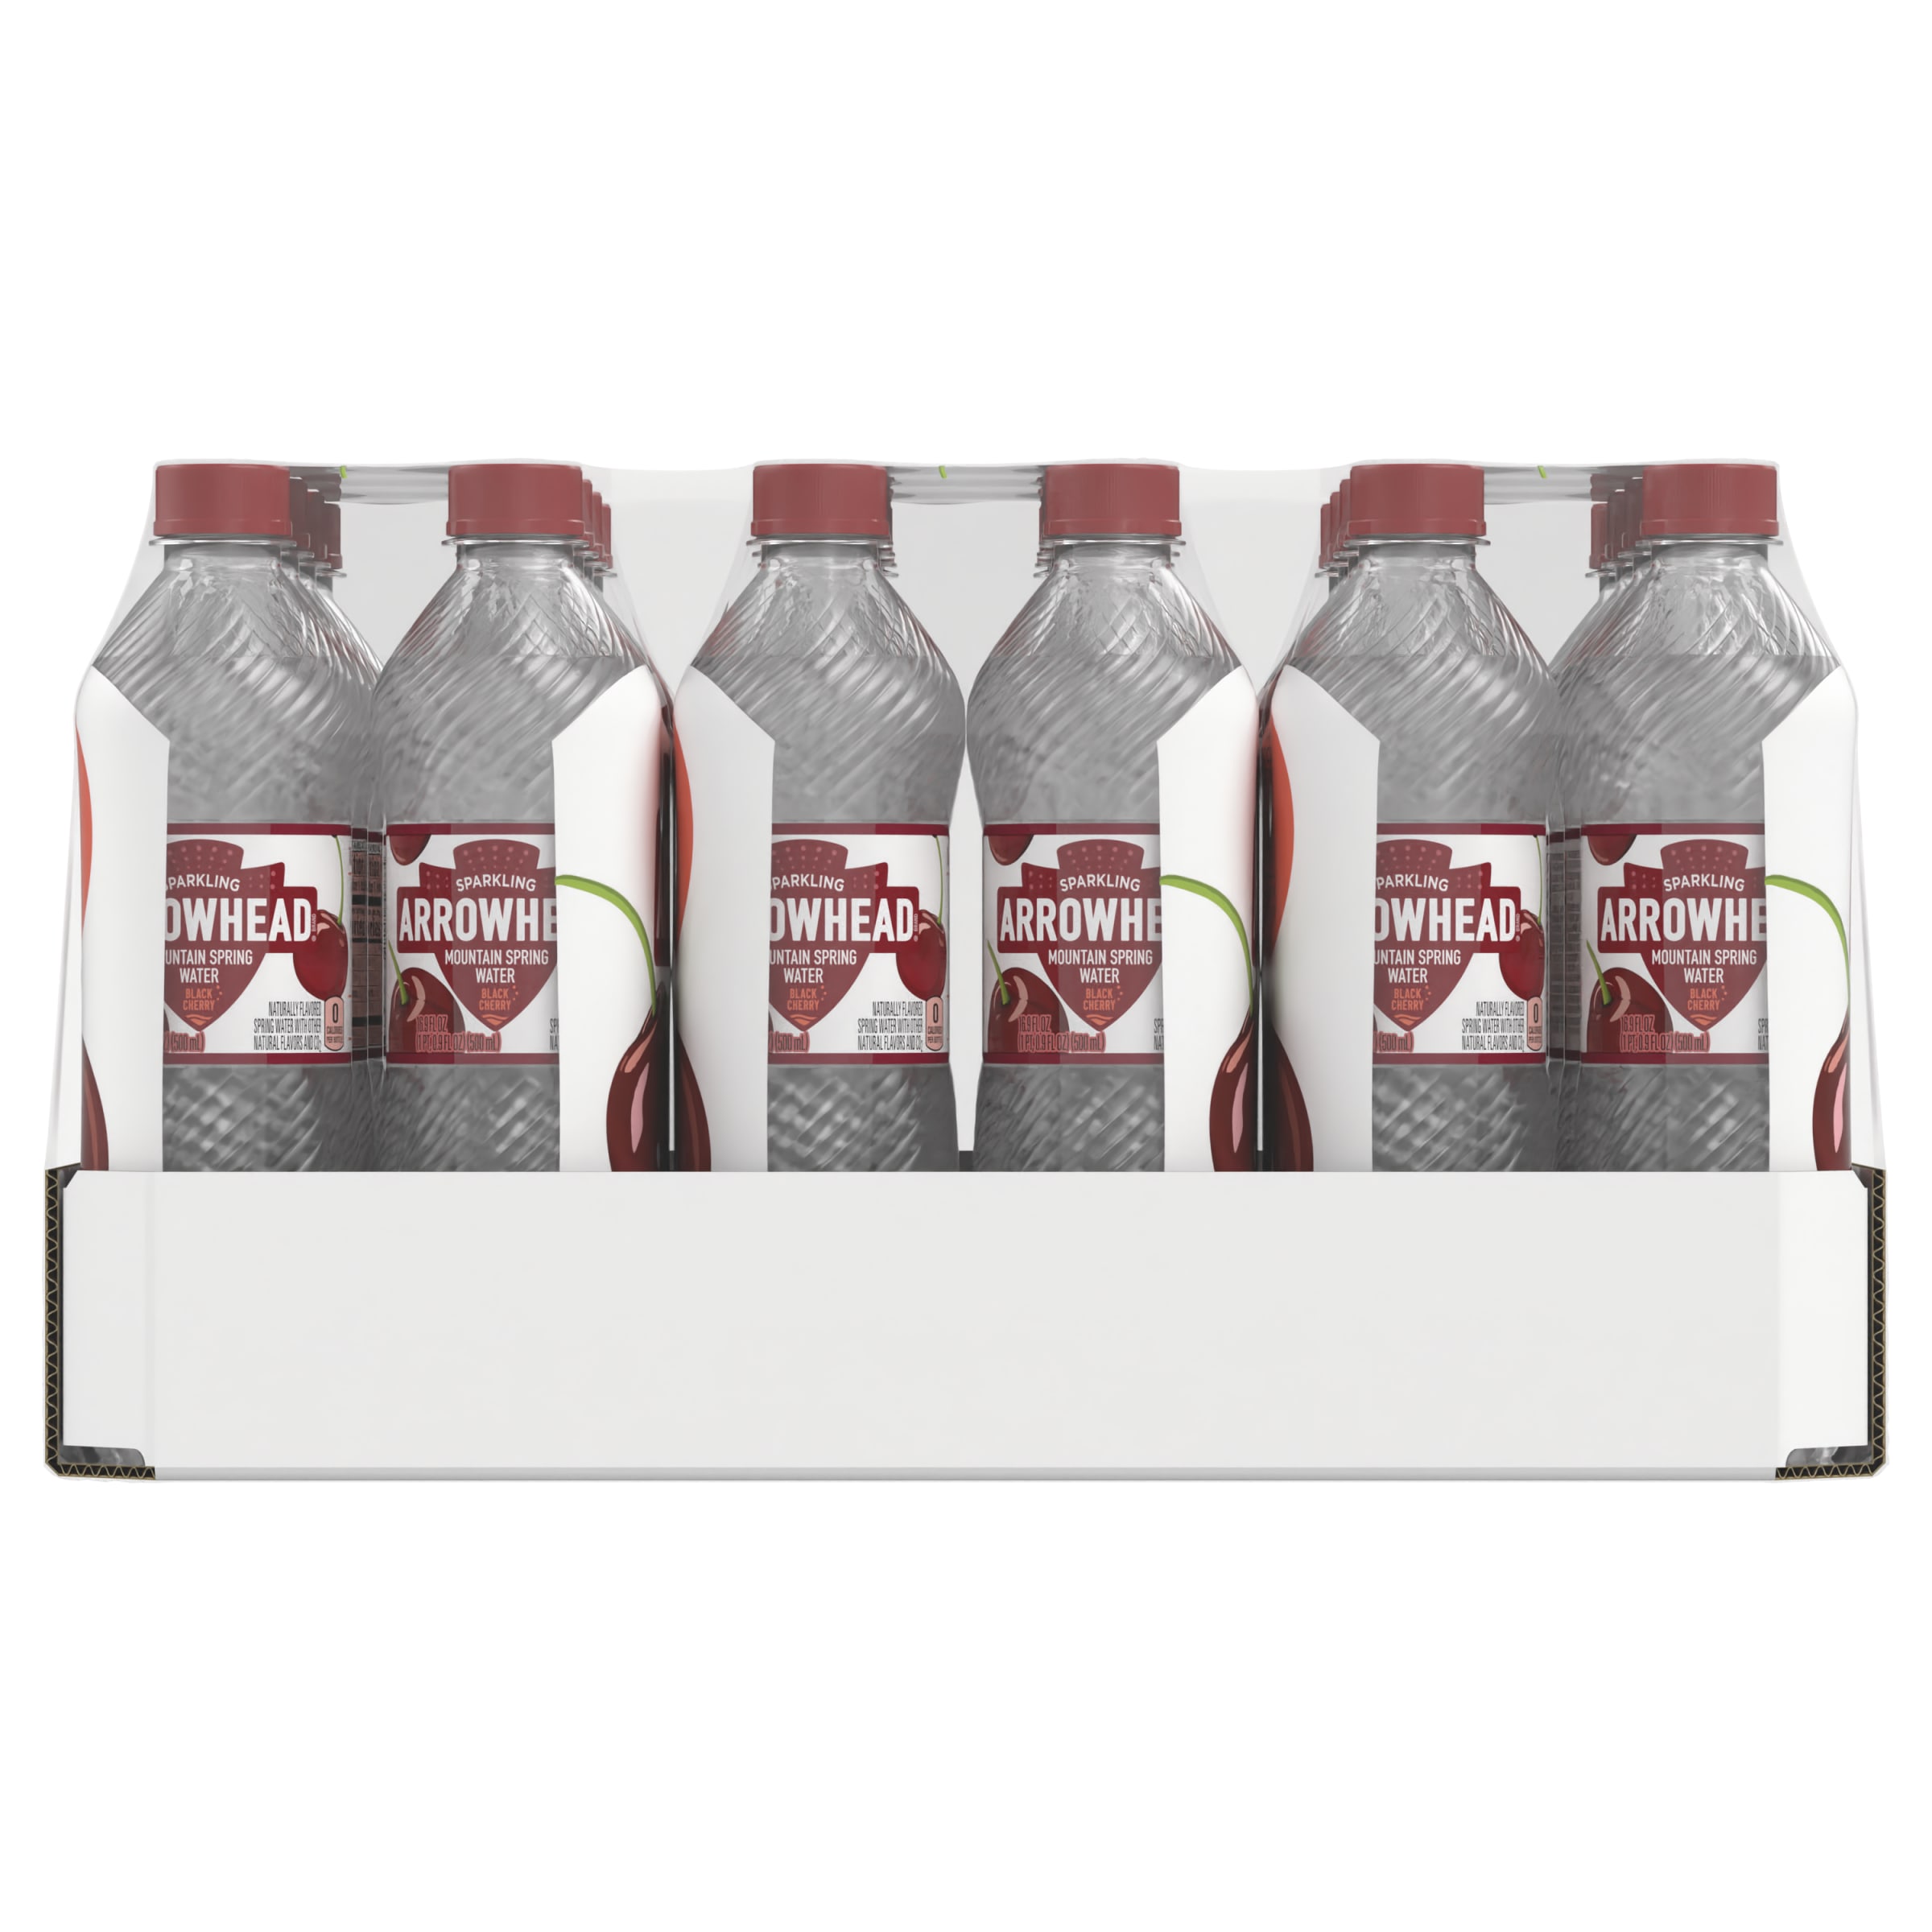 Arrowhead Sparkling Water, Black Cherry, 16.9 oz. Bottles (24 Count) - image 2 of 6